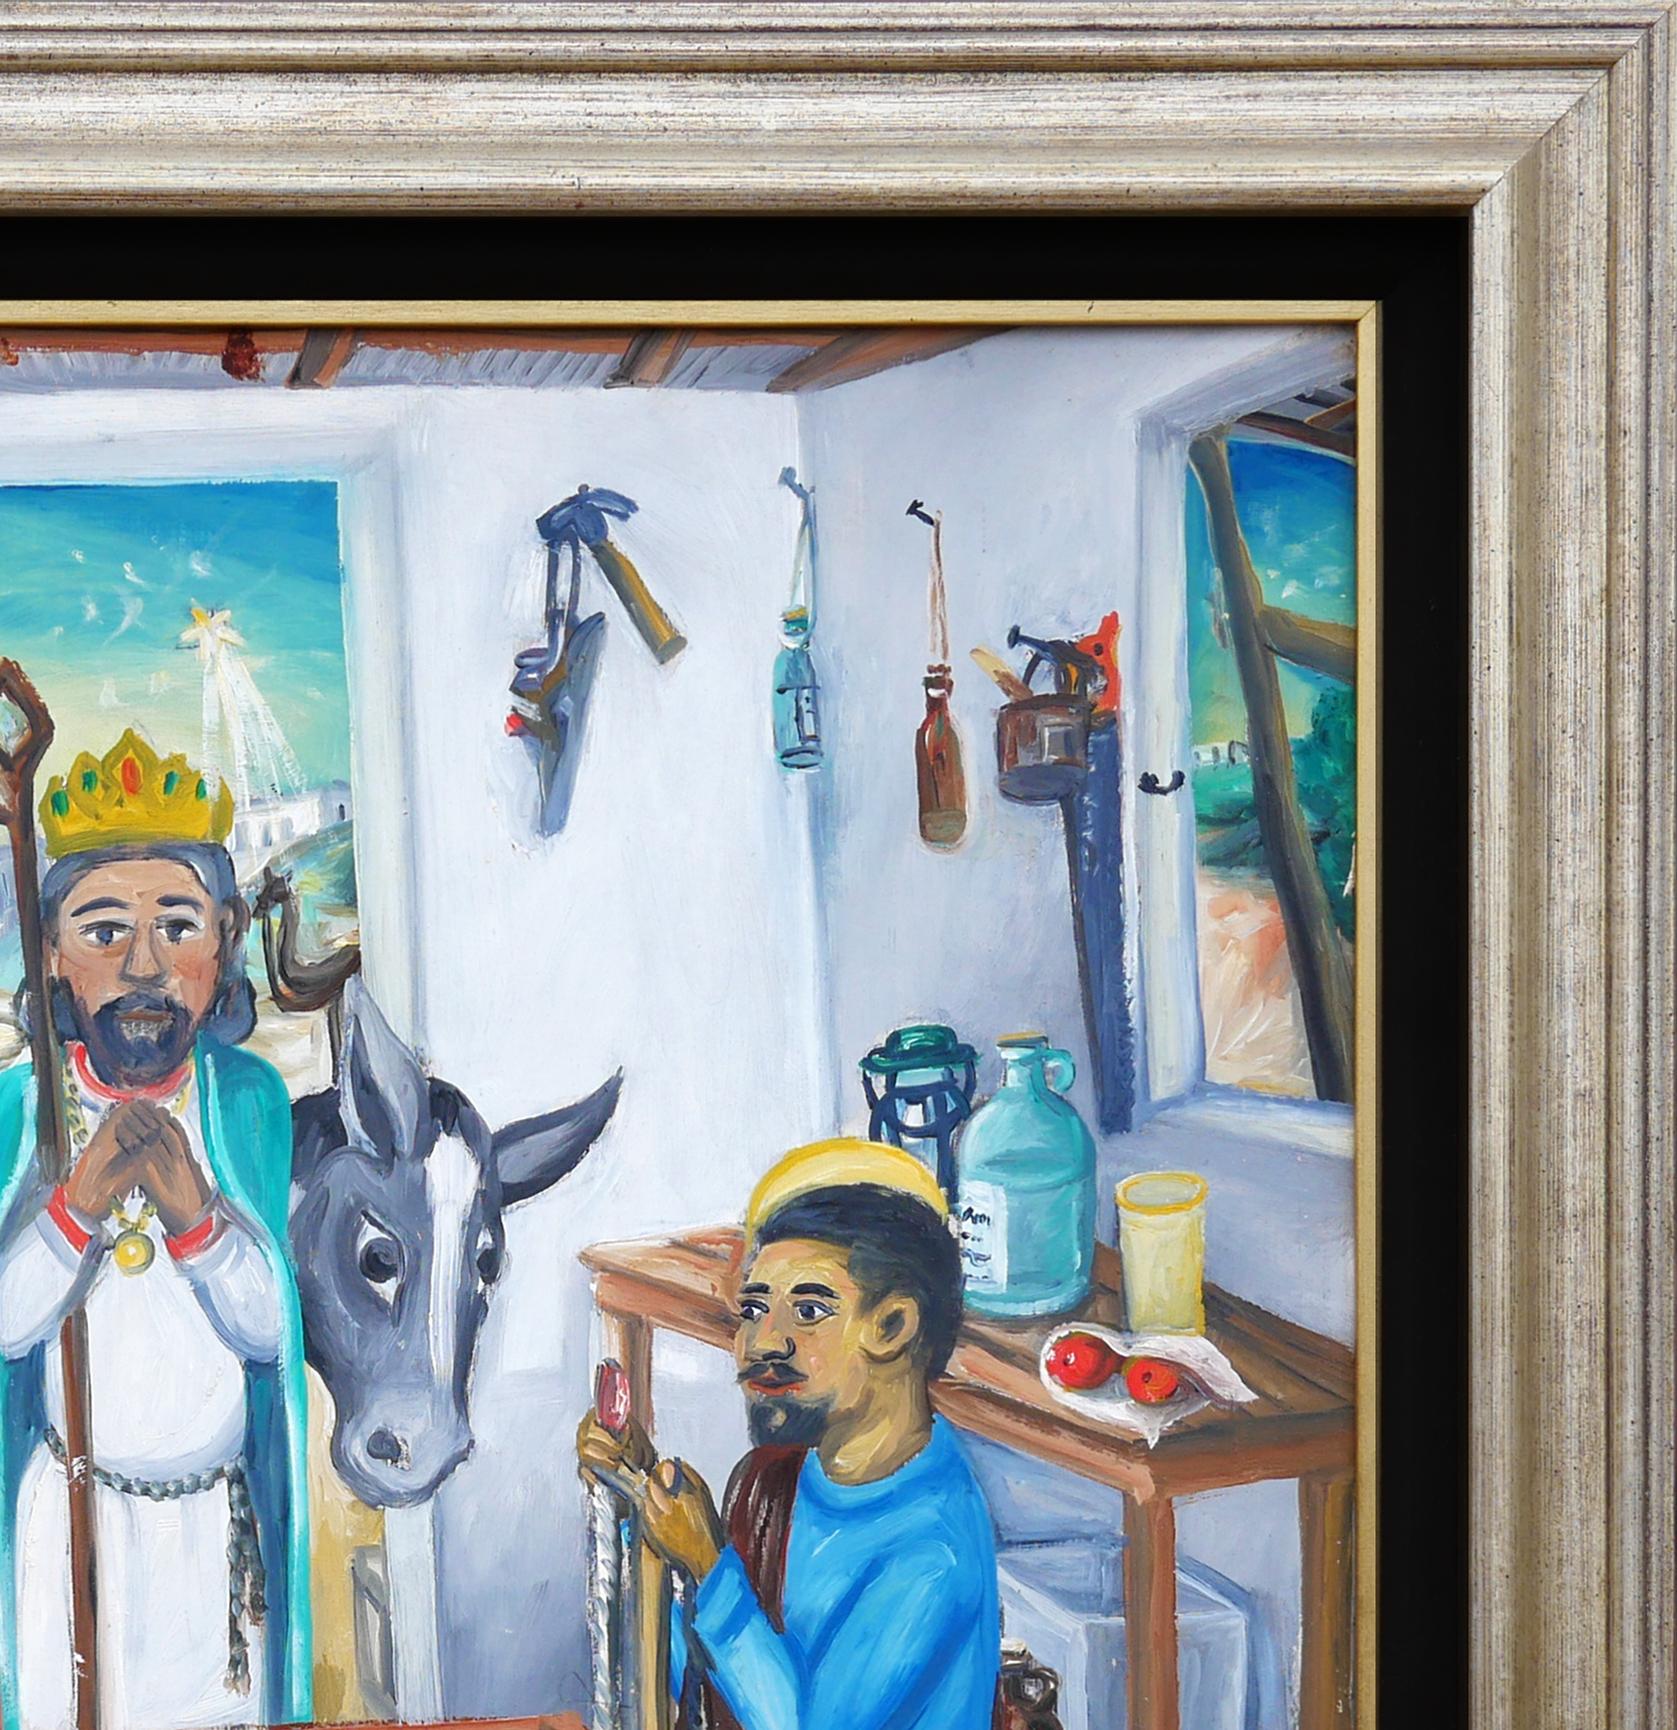 Modern colorful figurative painting of the Christian nativity scene. The work feature a central baby Jesus figure in a manger surrounded by Mary, Joseph, the Three Wise Men, and various farm animals. Through the back window the star of Bethlehem can